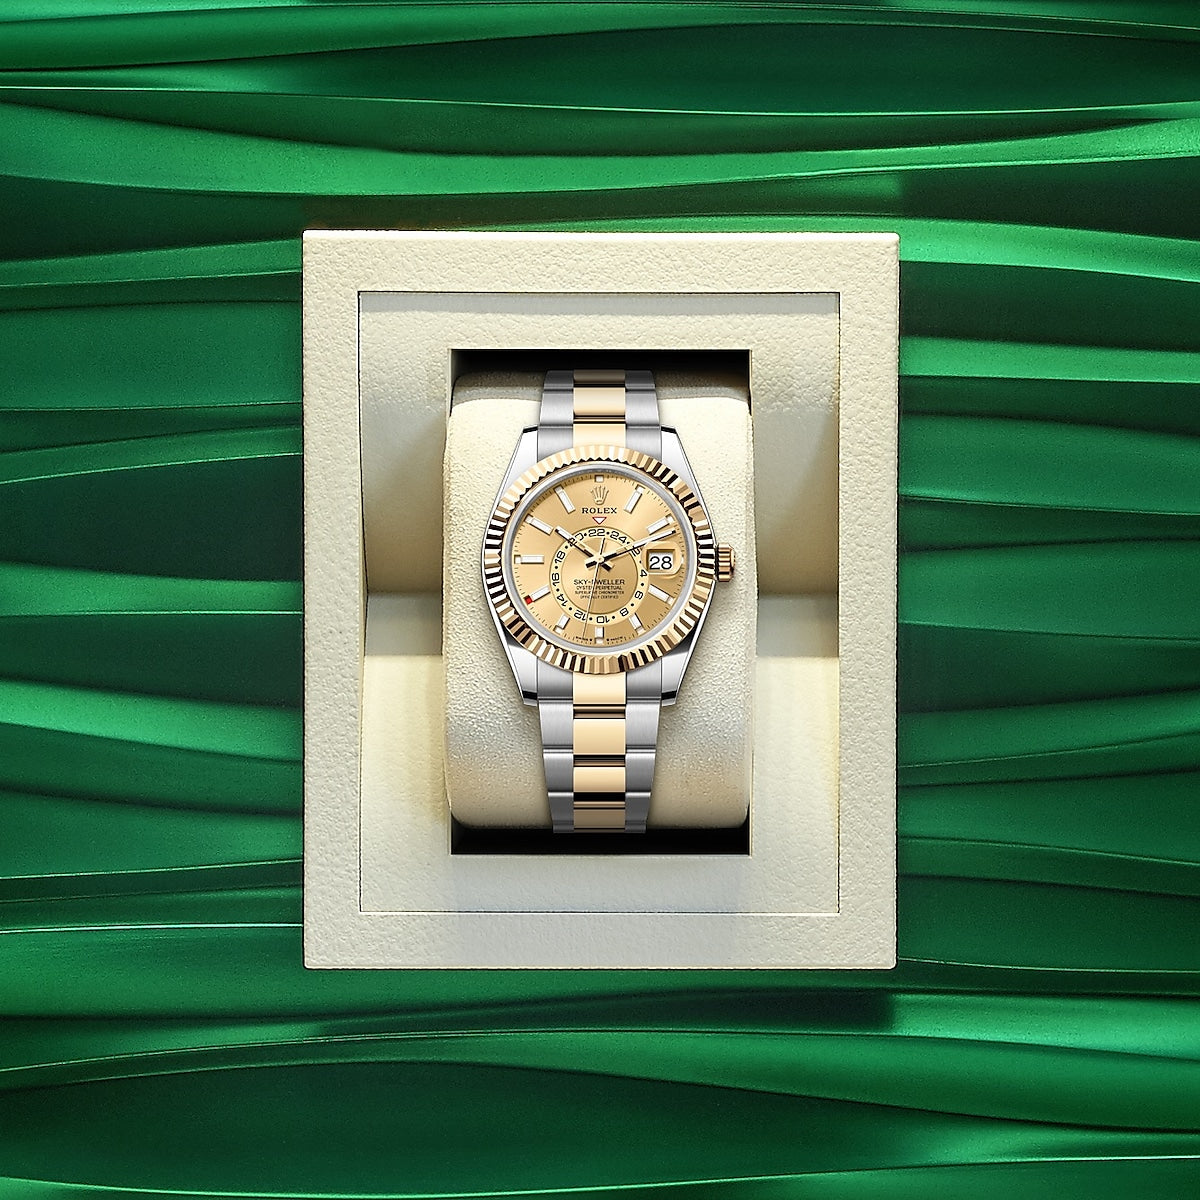 Rolex Sky-Dweller in Oystersteel and gold, M336933-0001